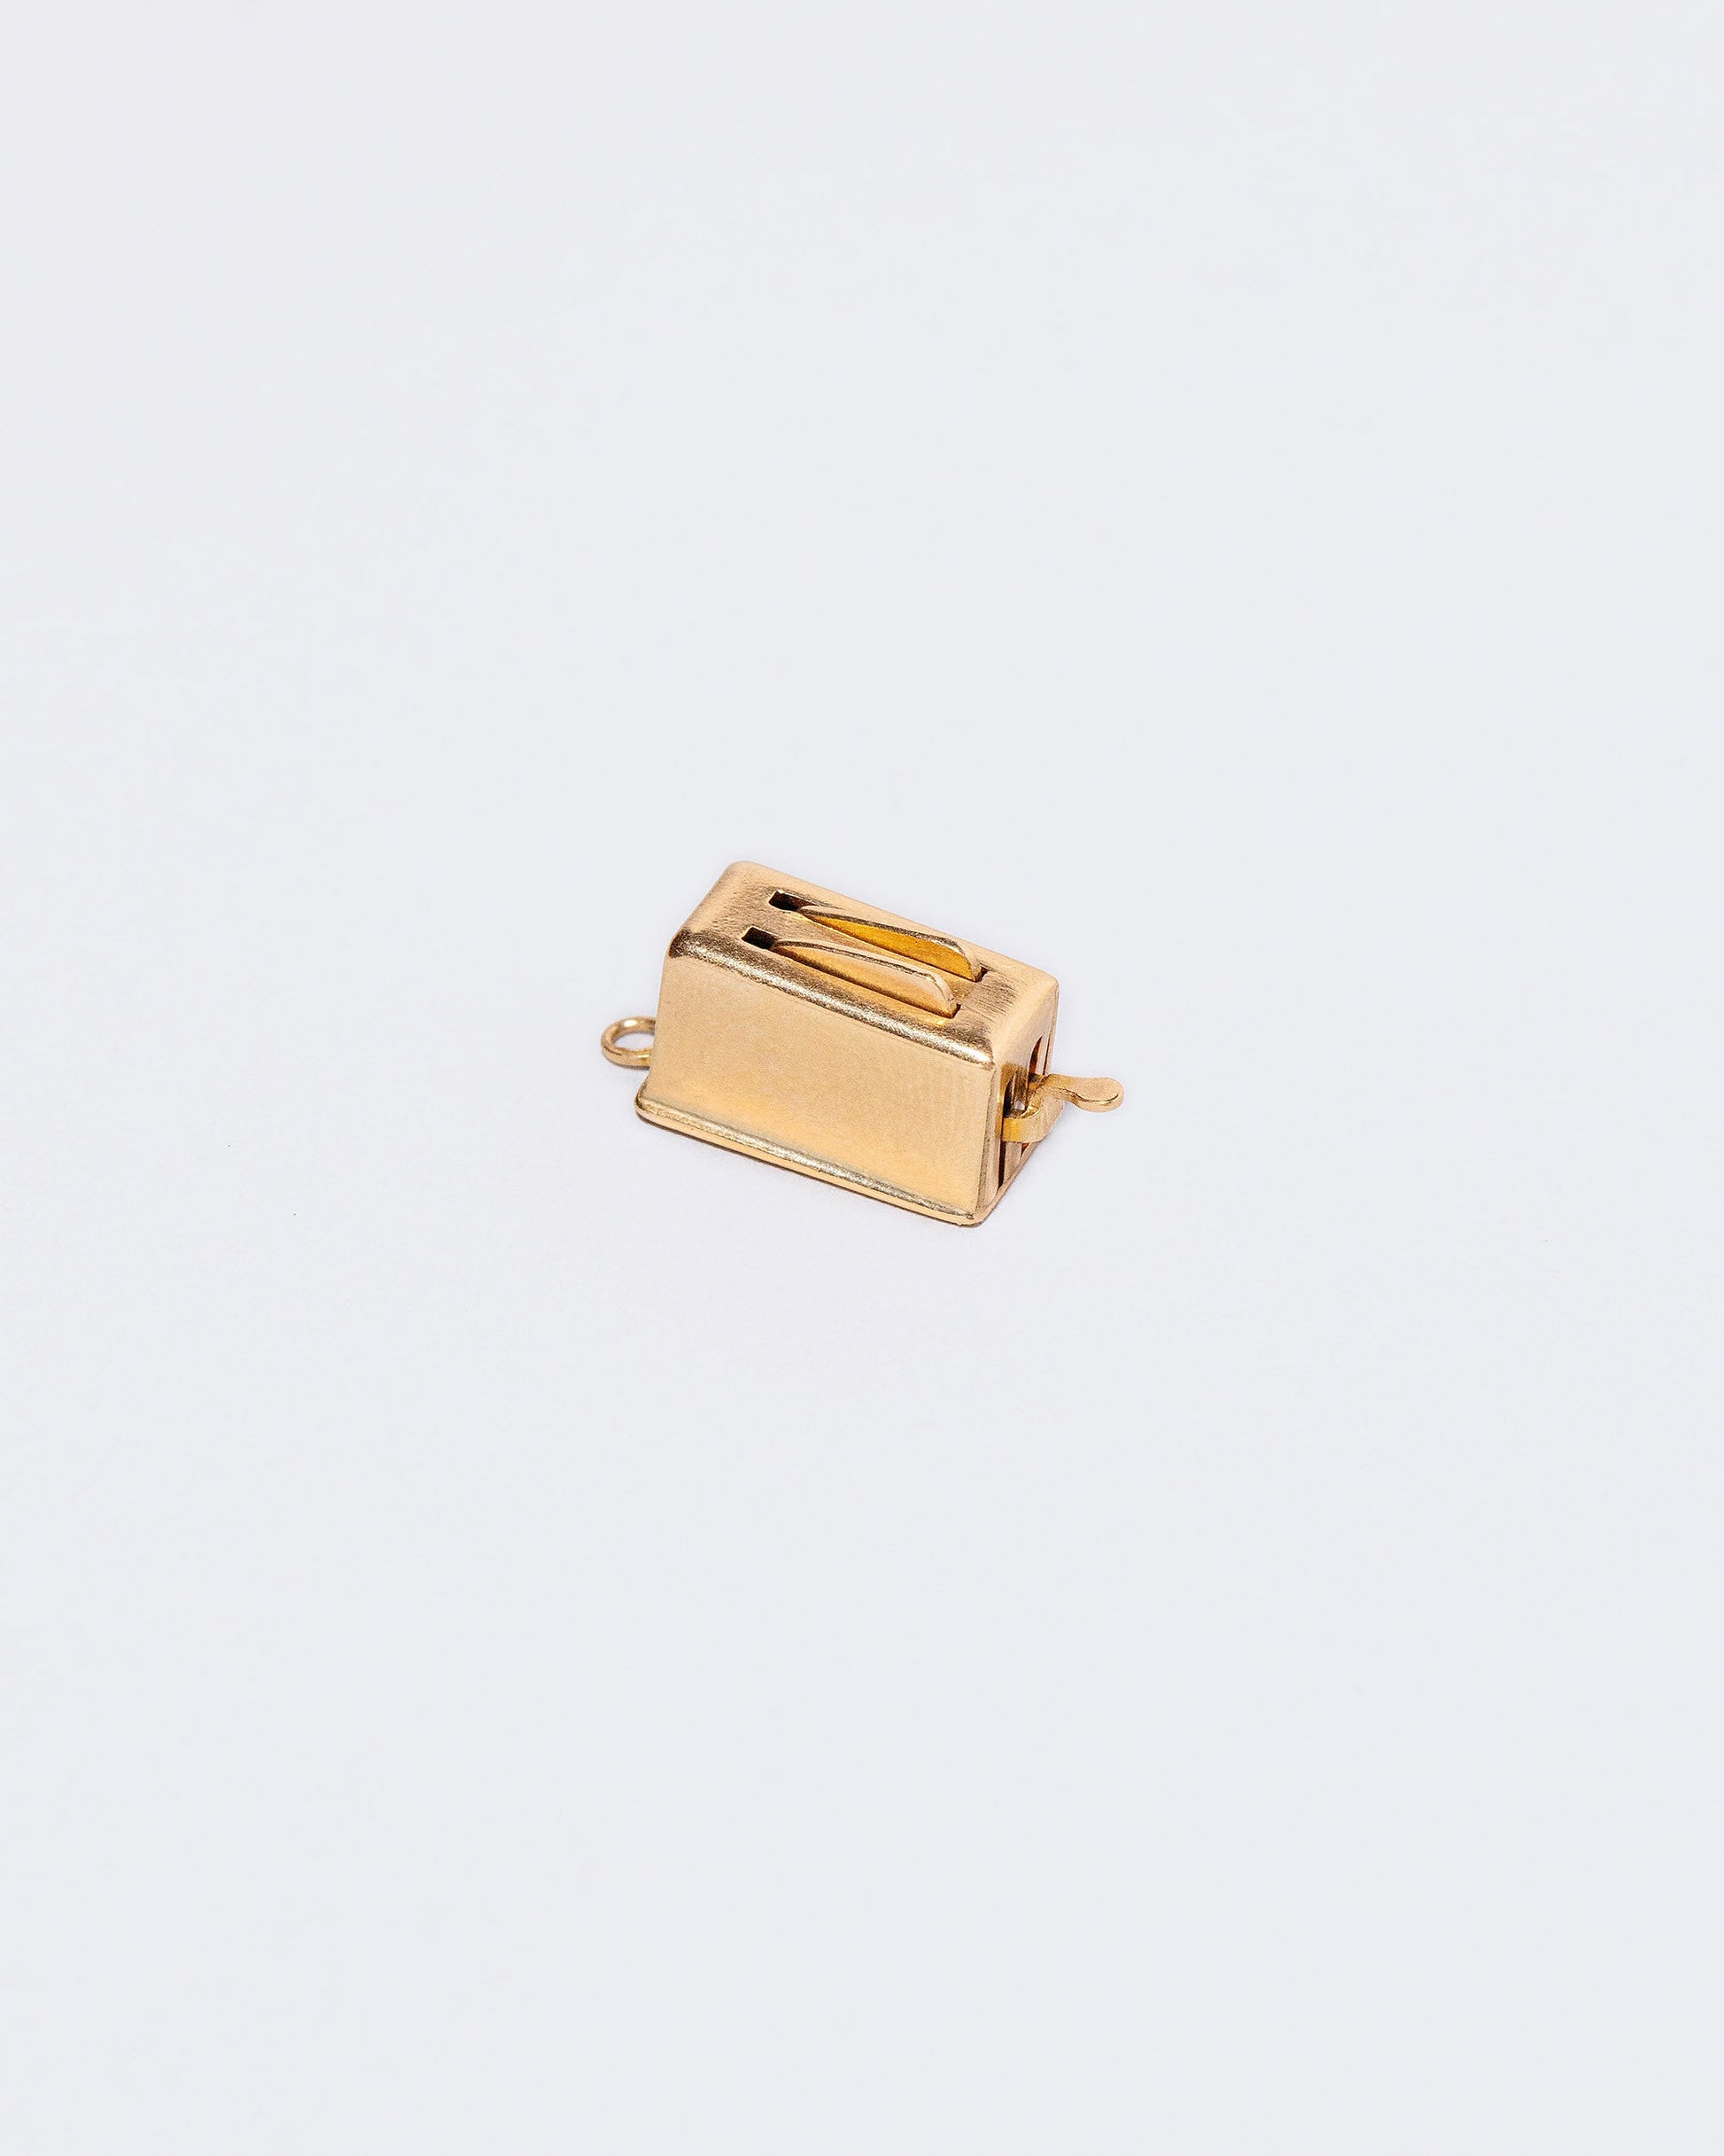  Toaster Charm on light color background.